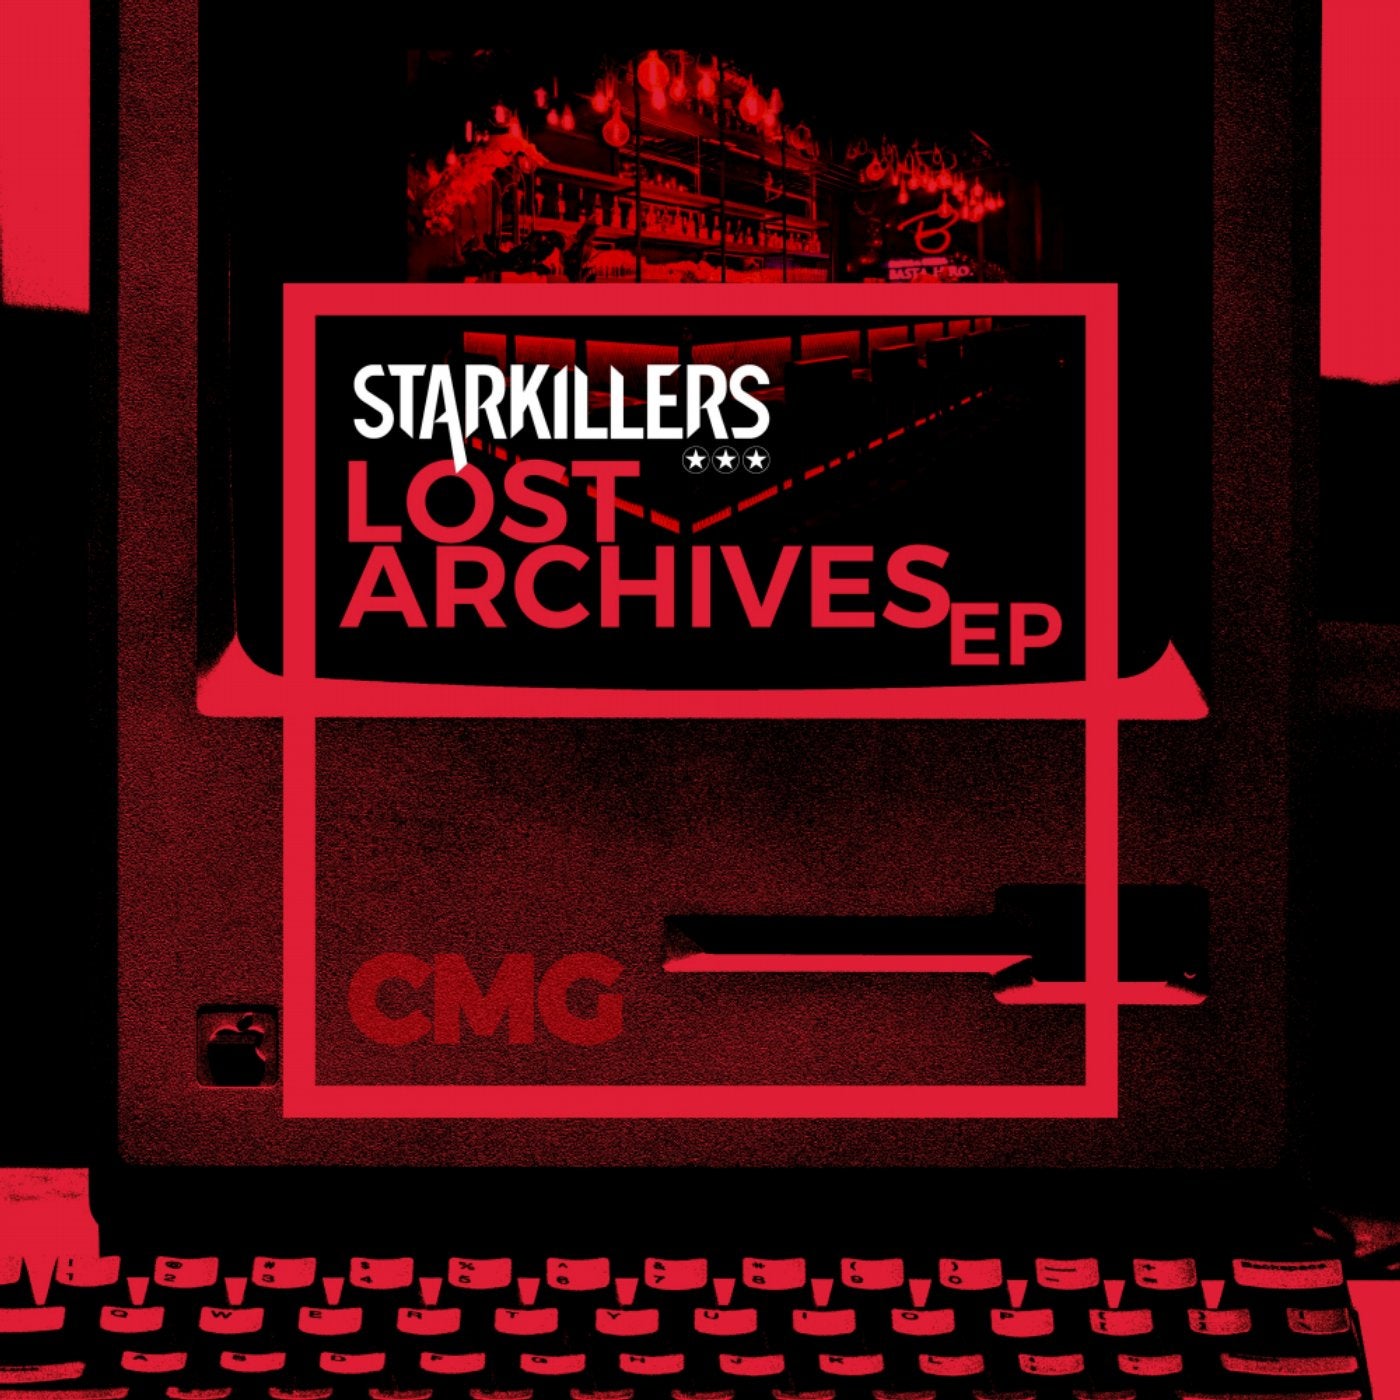 Lost Archives EP